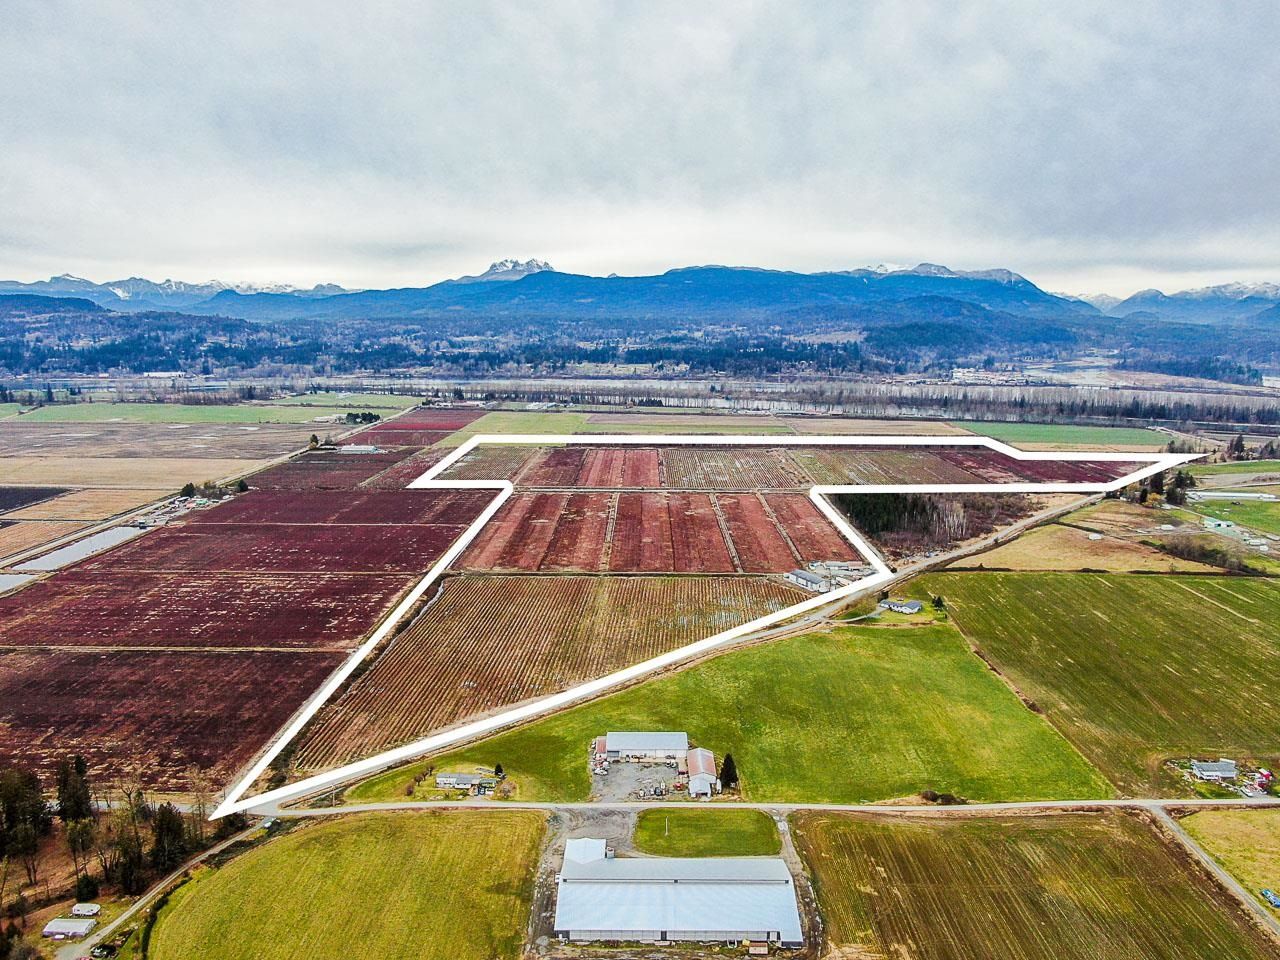 Main Photo: 8201 DYKE Road in Abbotsford: Bradner Agri-Business for sale : MLS®# C8051831